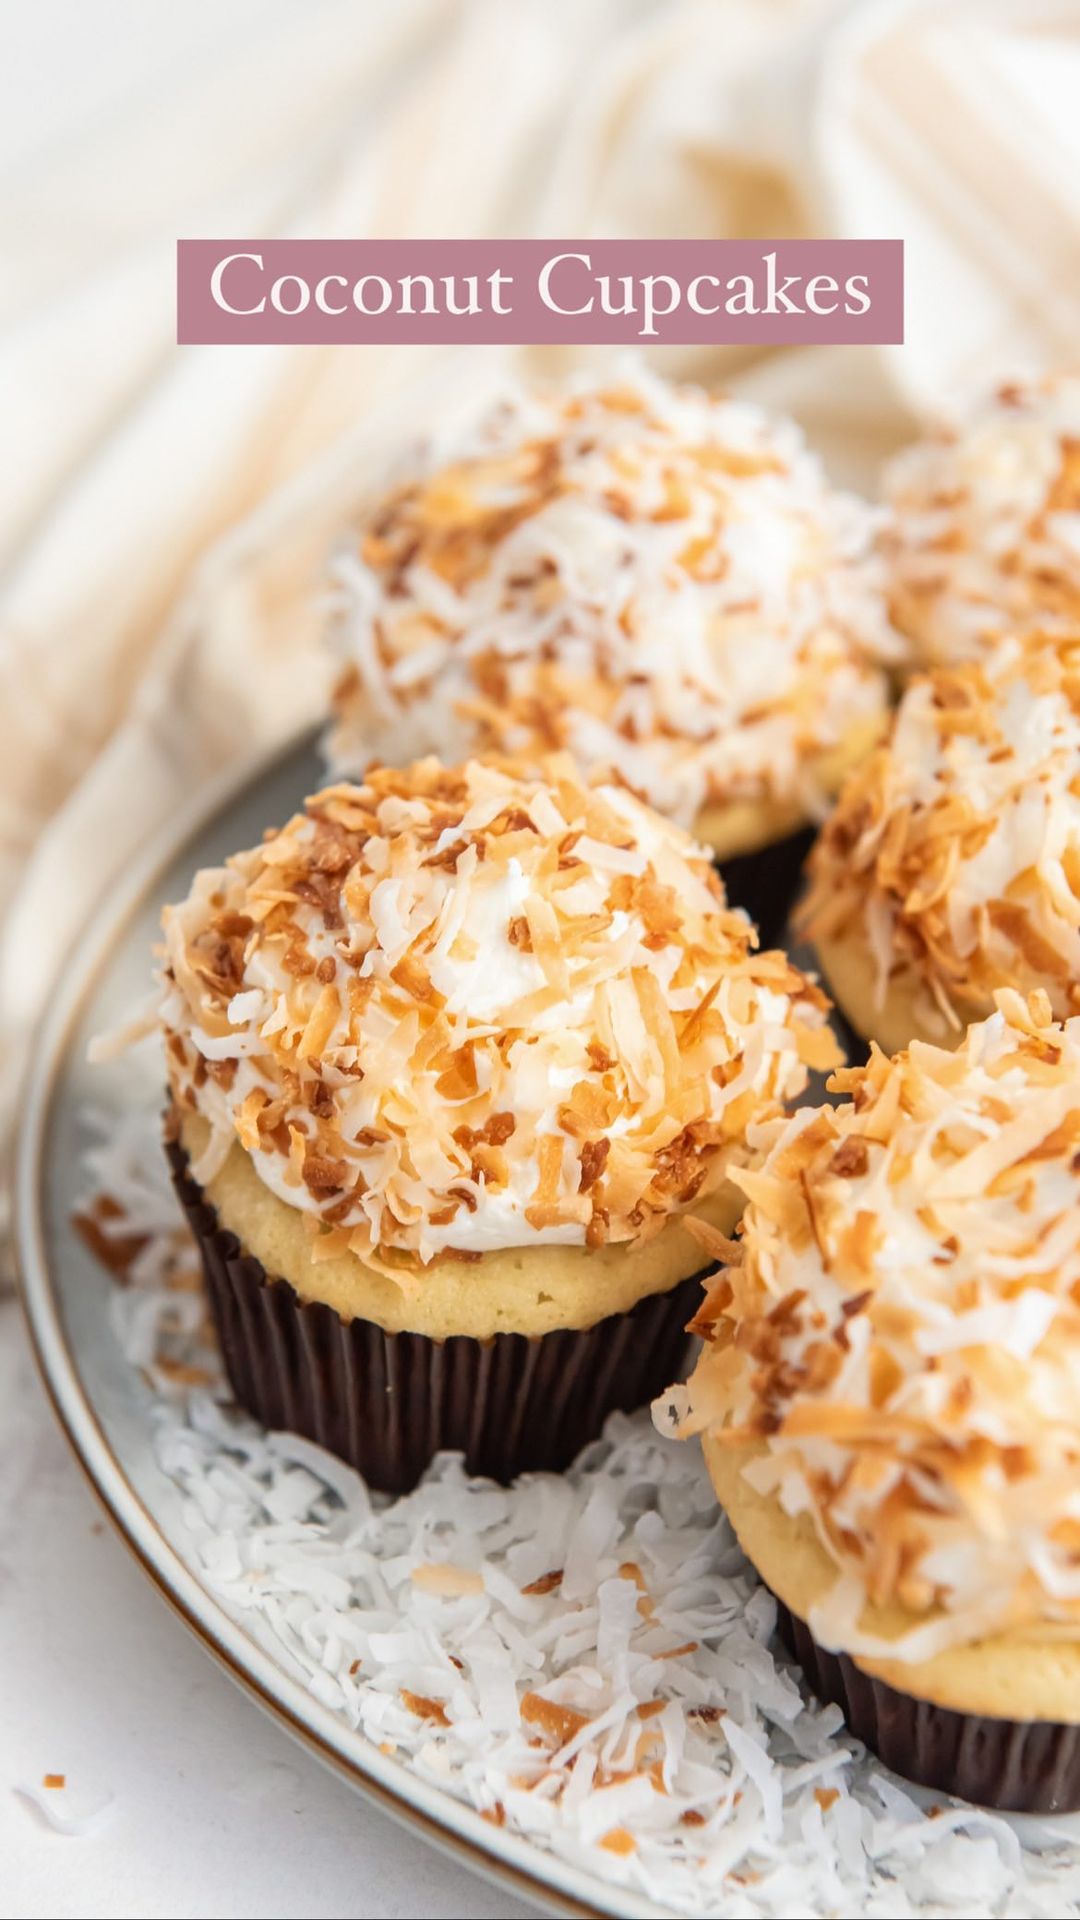 Tropical Coconut Cupcakes with Creamy Coconut Buttercream